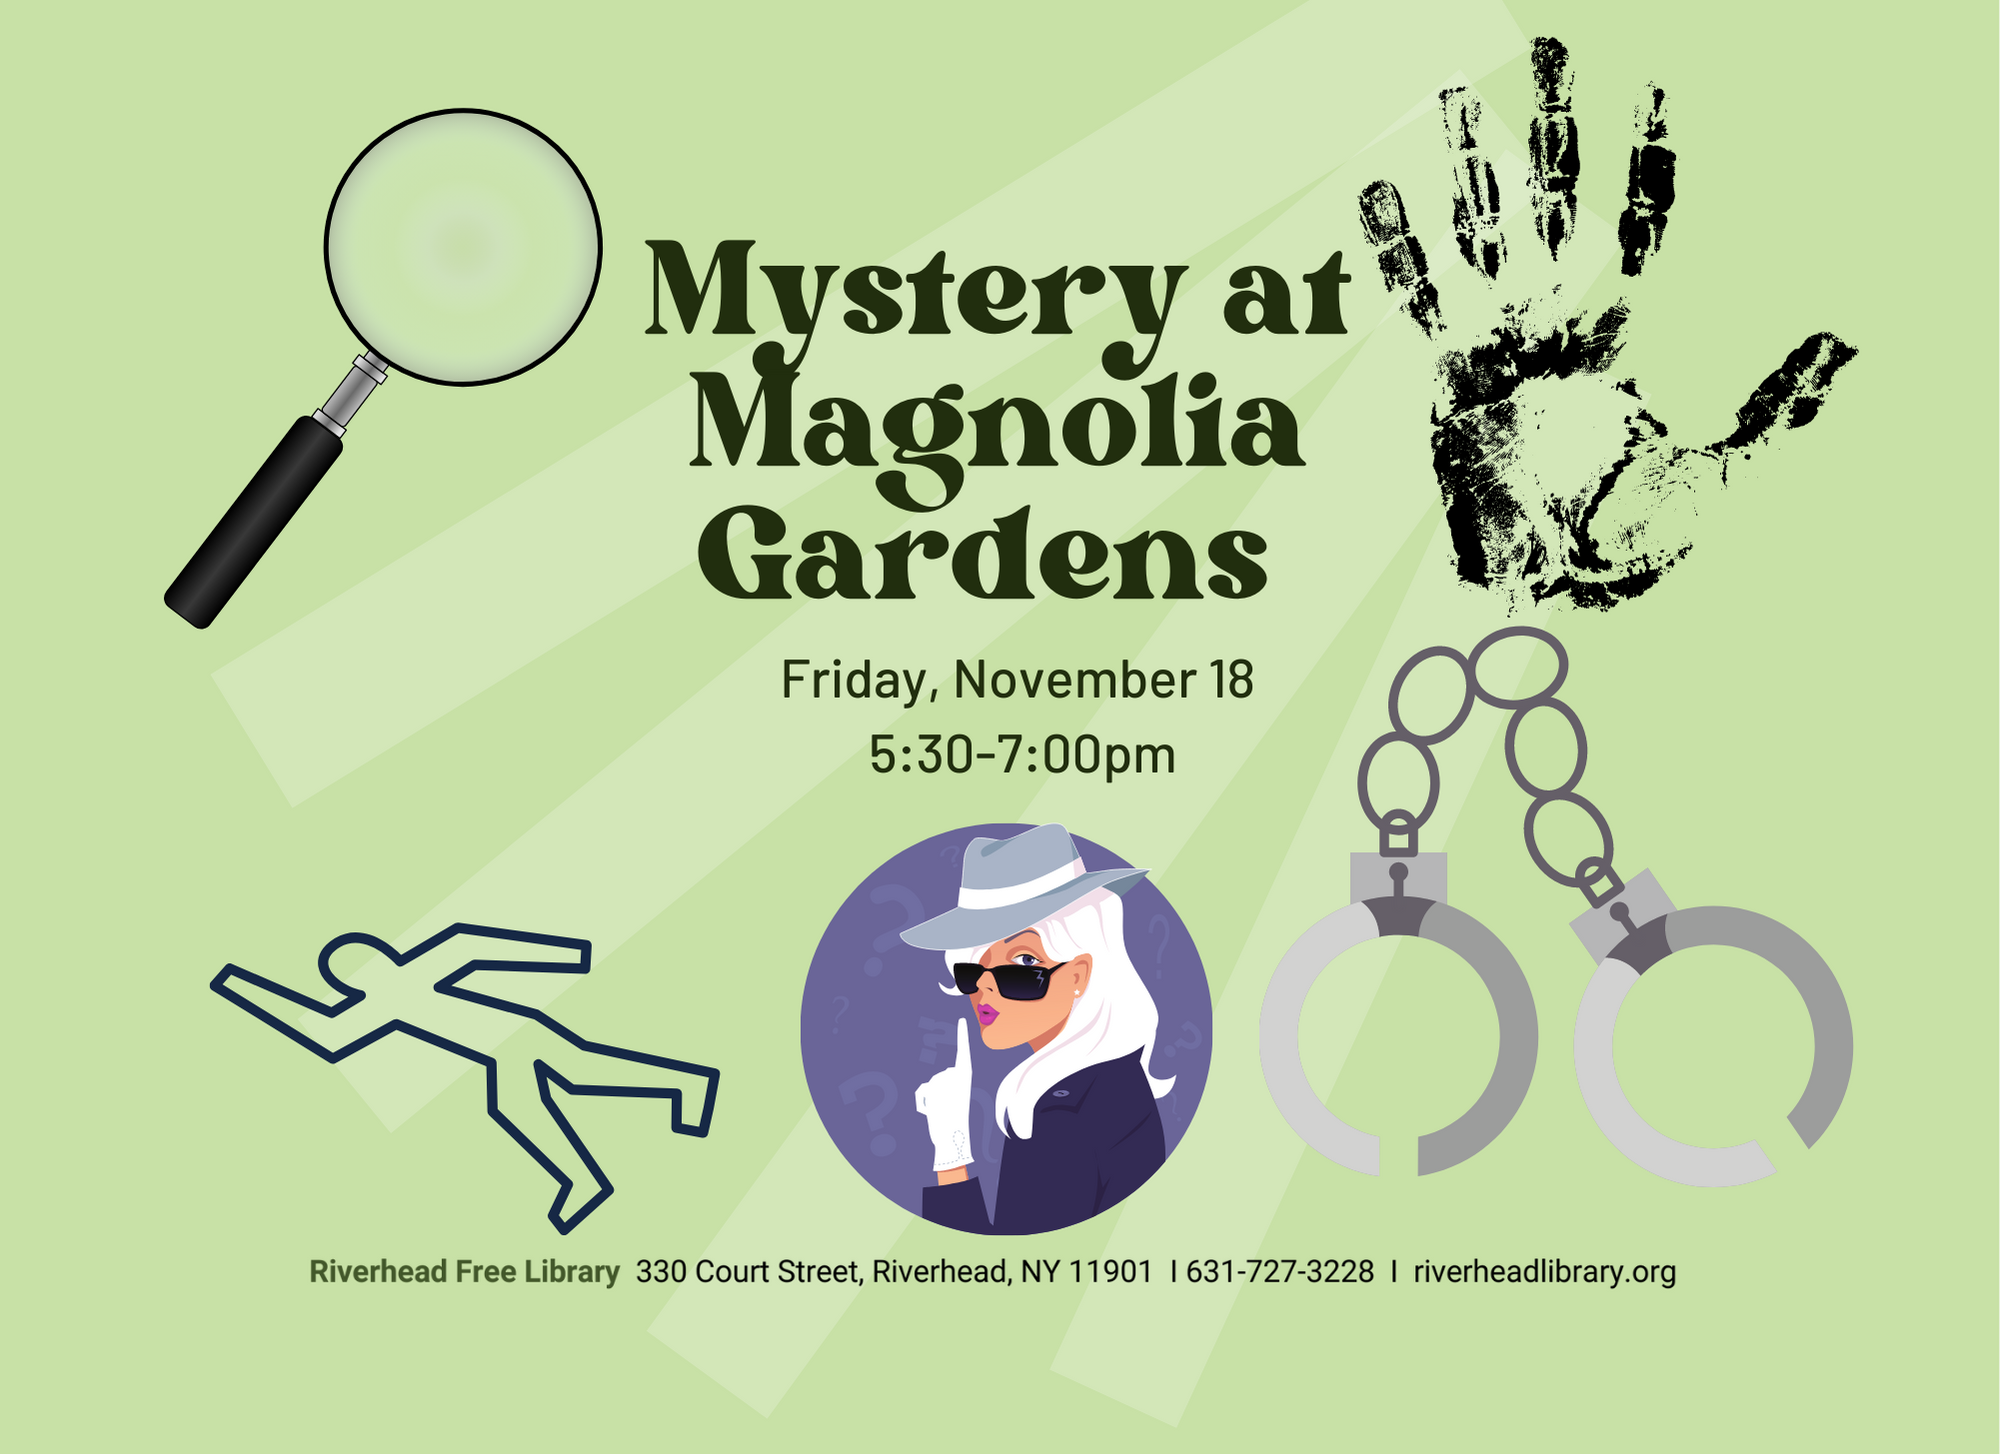 Program flyer featuring the following text "Mystery at Magnolia Gardens. Friday, November 18th. 5:30-7:00pm."